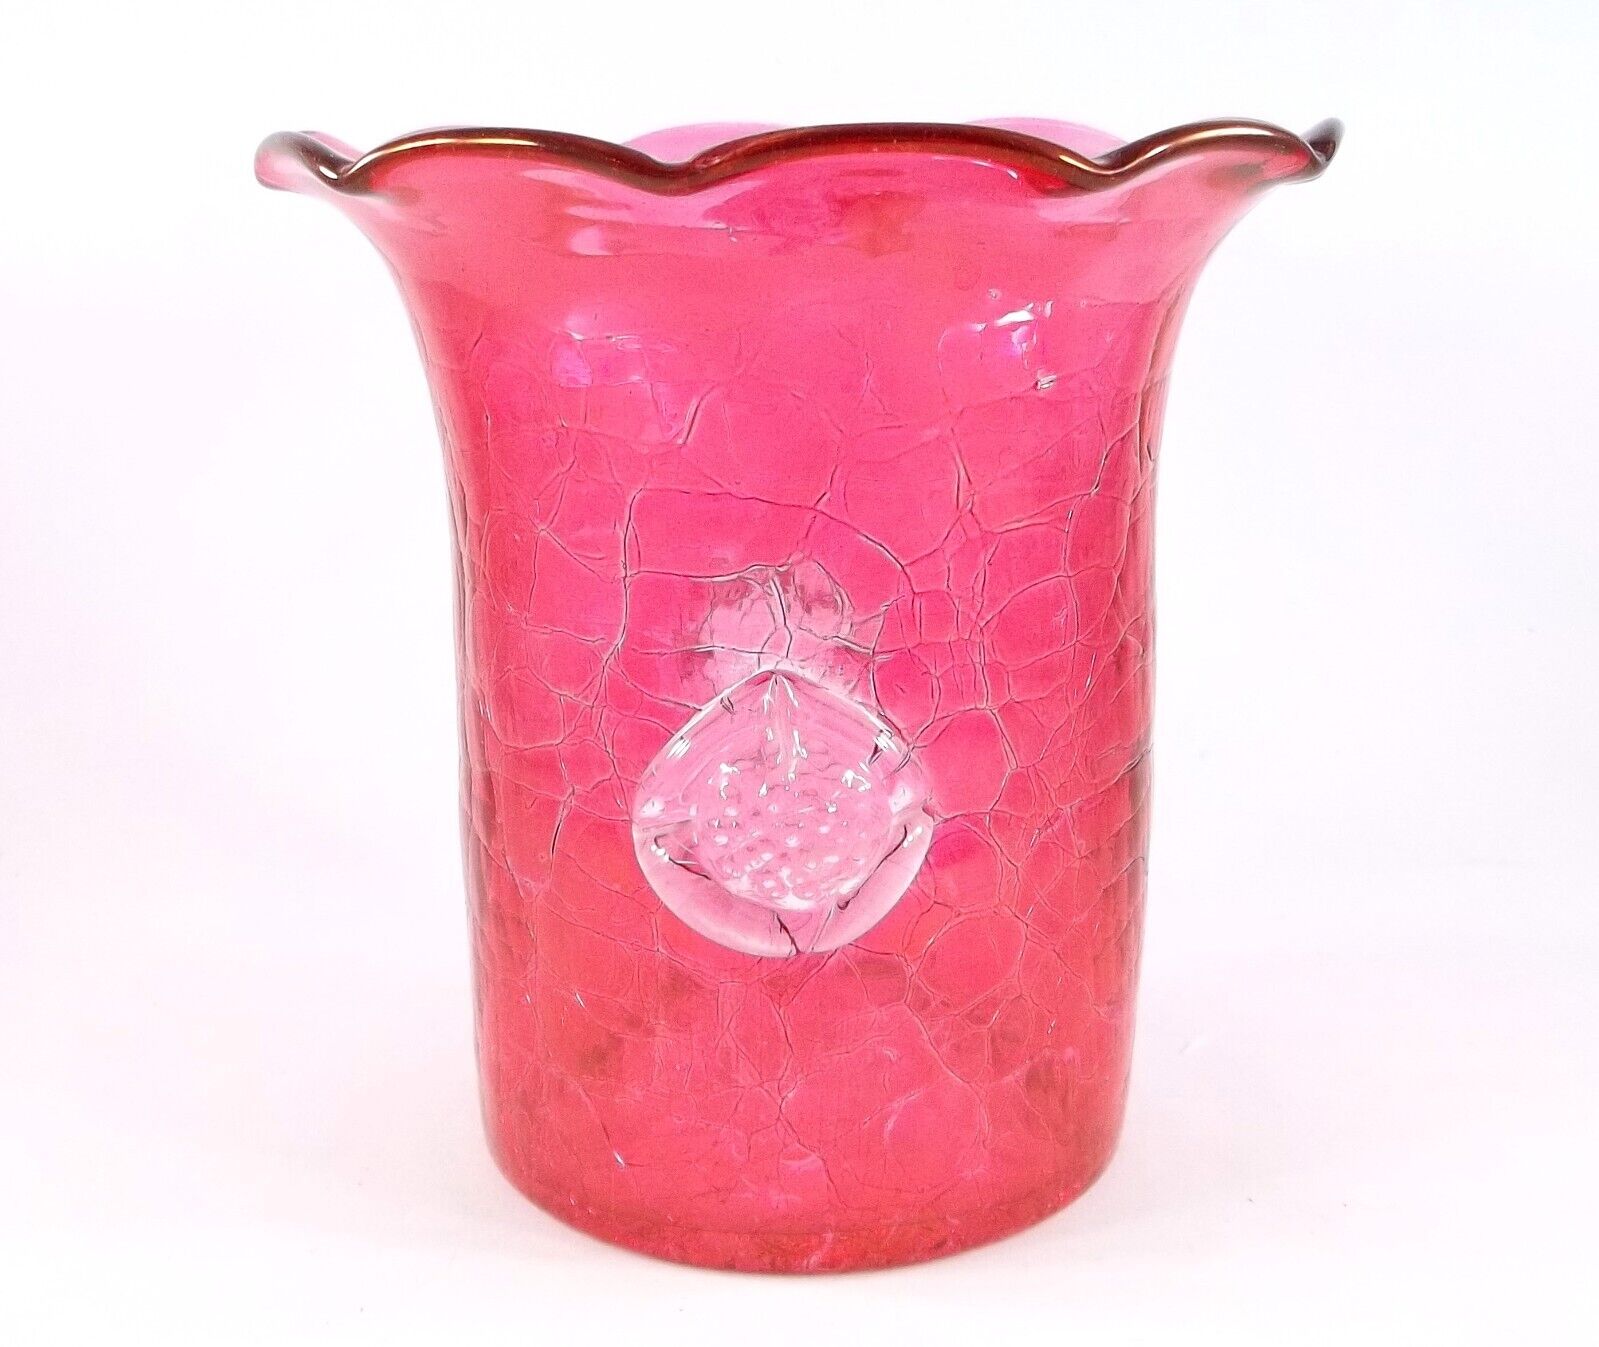 Hand Crafted Red Crackle Glass Vase With Rosettes, Probably WWII Era